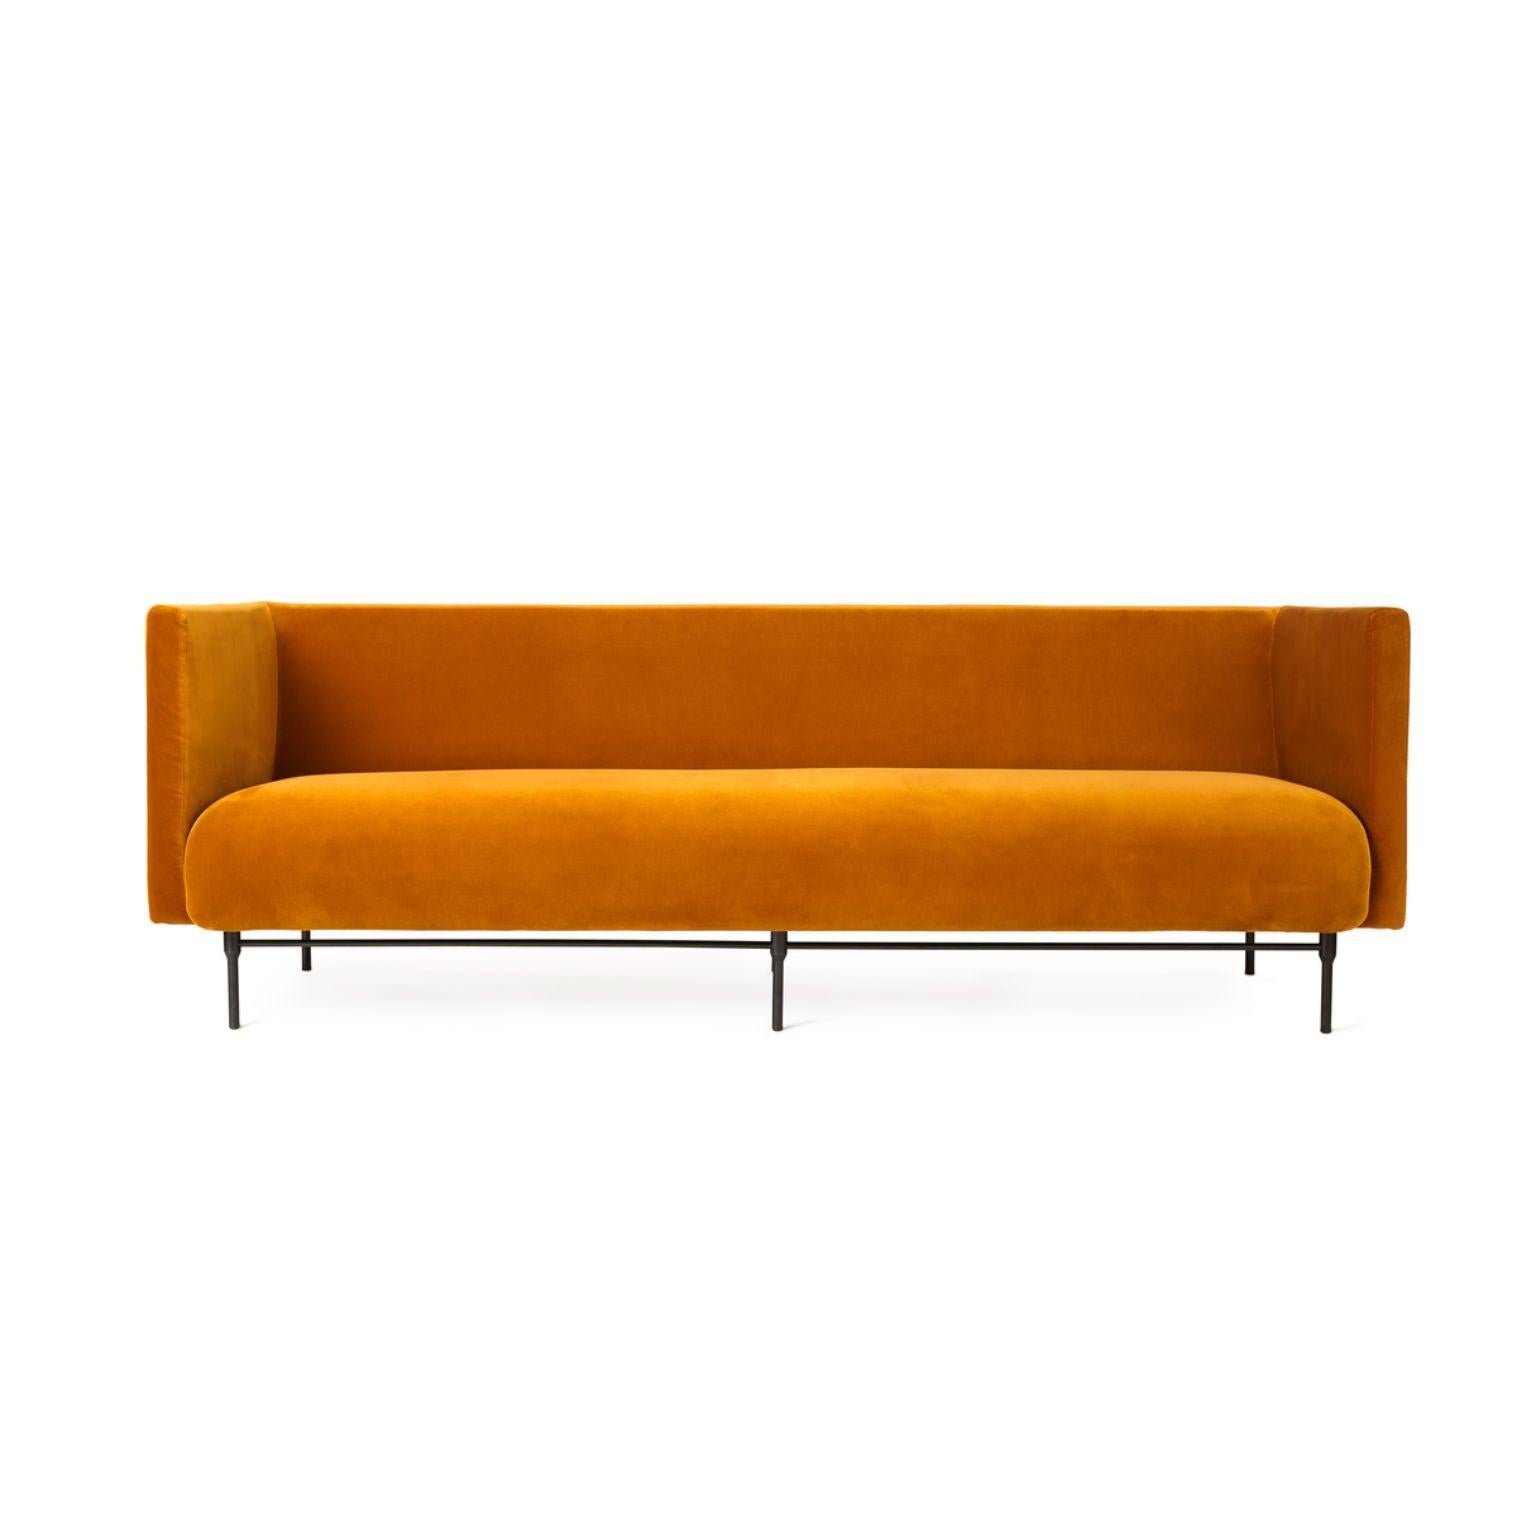 Galore 3 Seater Amber by Warm Nordic
Dimensions: D222 x W83 x H 76 cm
Material: Textile upholstery, Powder coated black steel legs, Wooden frame, foam, spring system.
Weight: 62 kg
Also available in different colours and finishes. Please contact